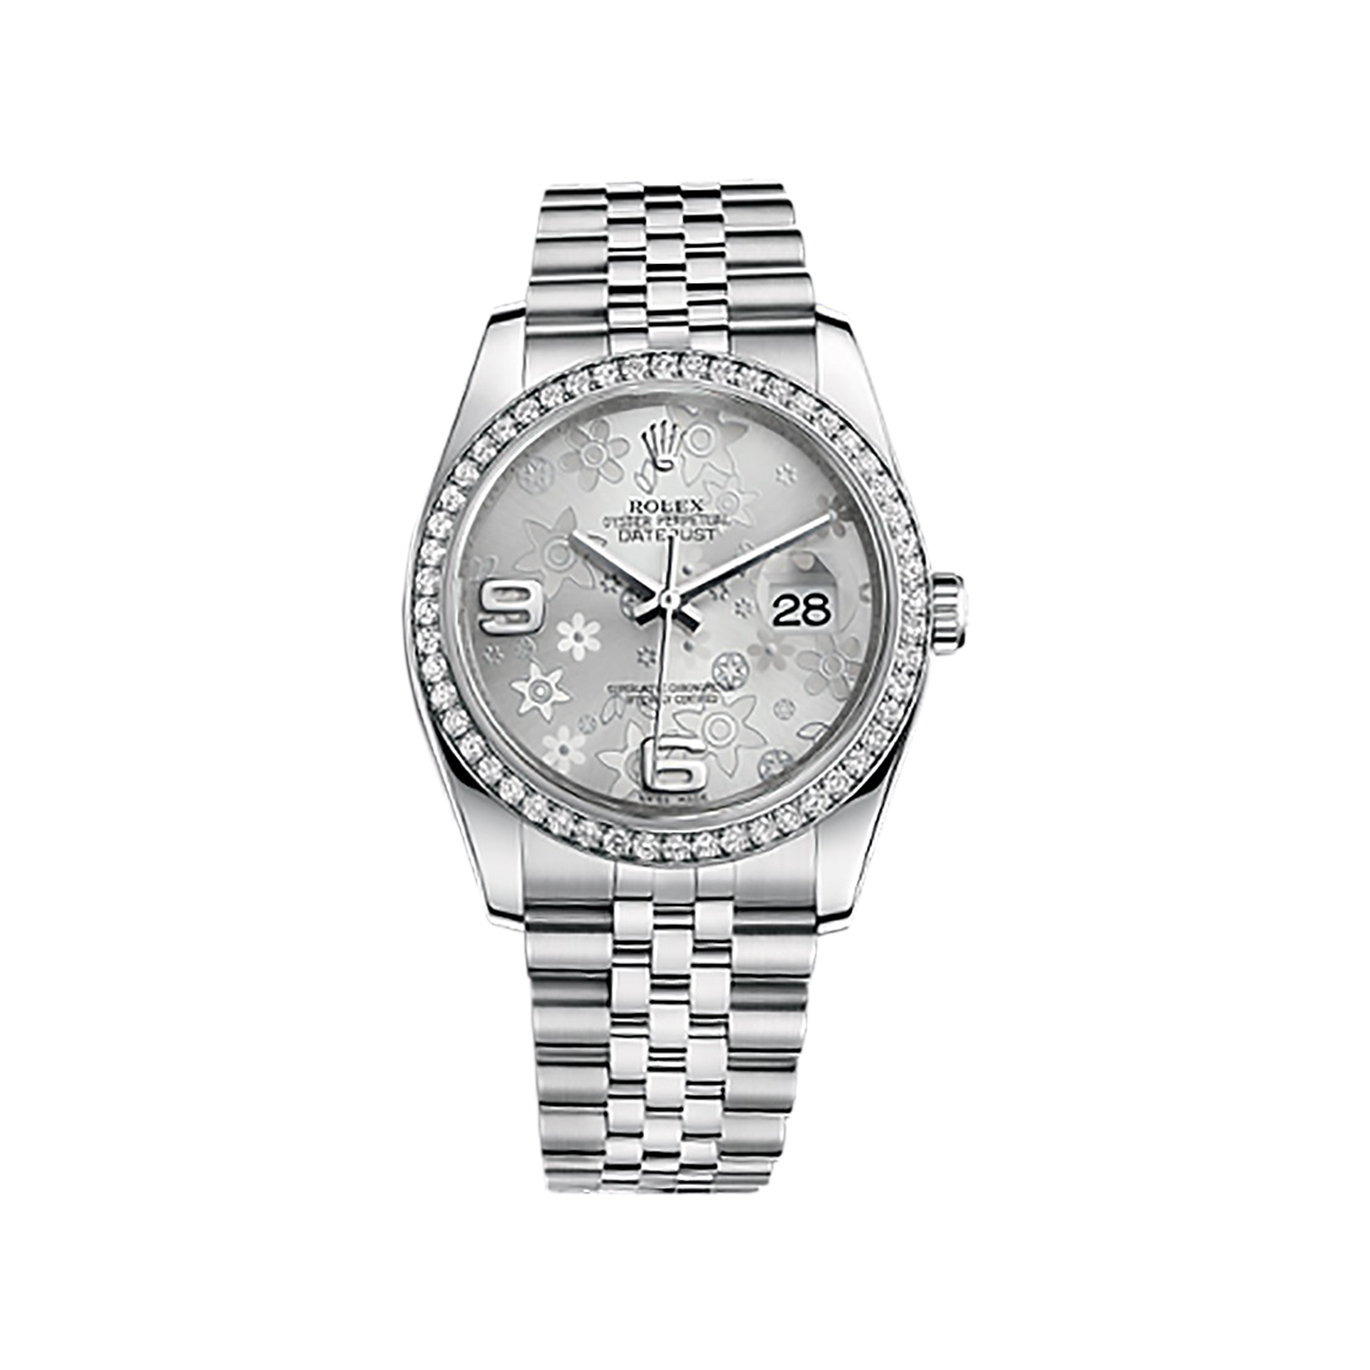 Datejust 36 116244 White Gold & Stainless Steel Watch (Silver Floral Motif)